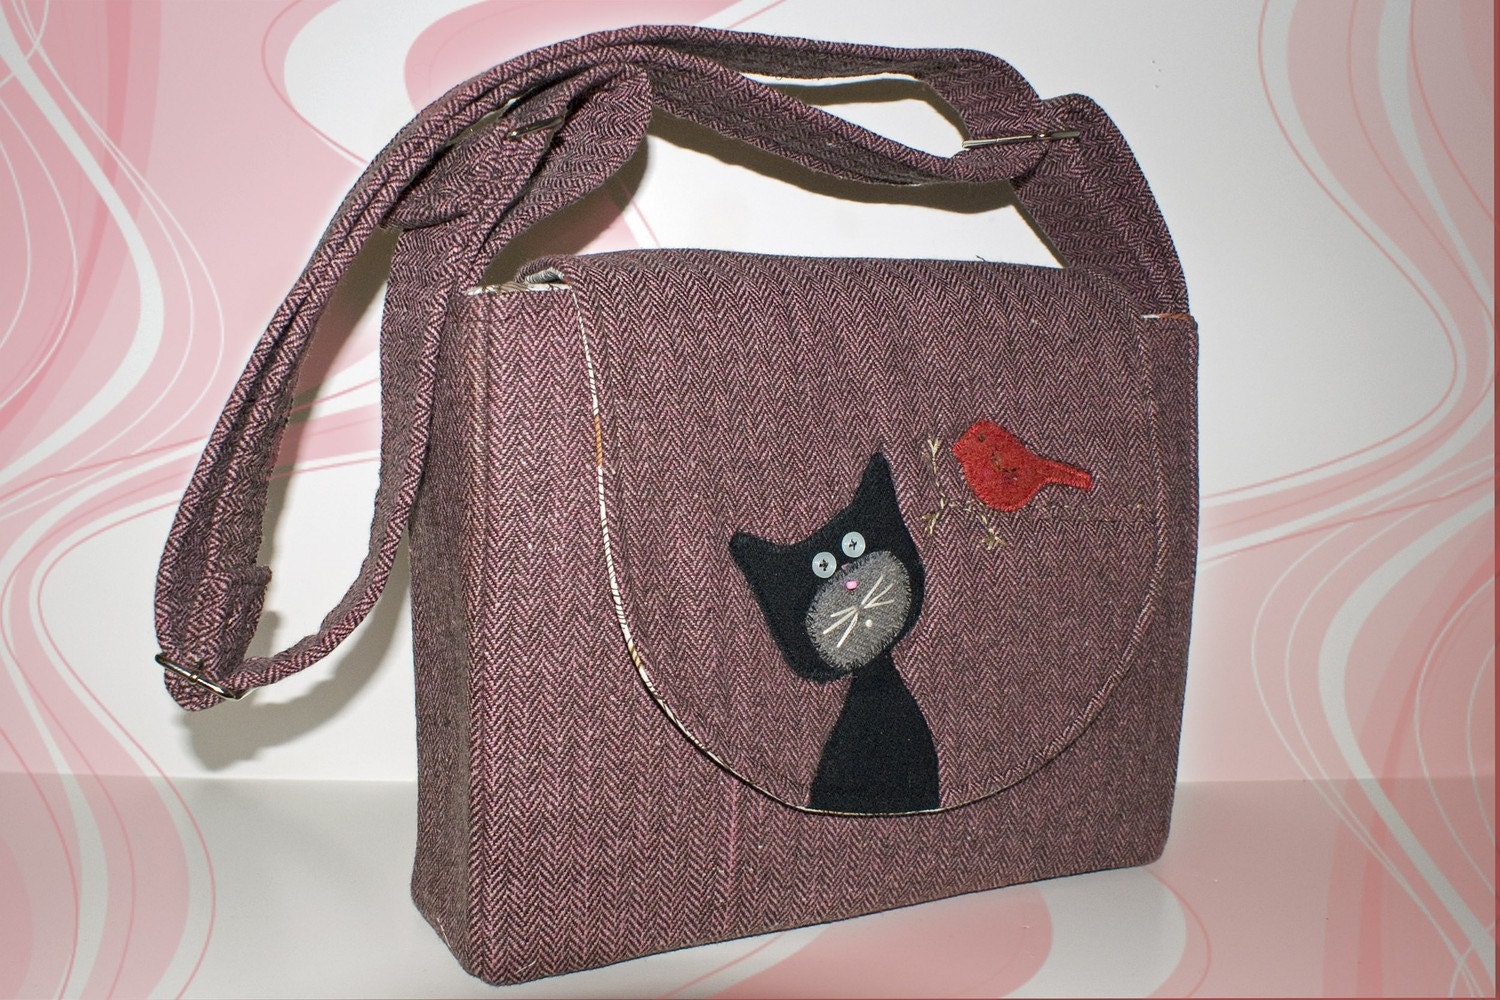 Reclaimed Wool Messenger Bag Kitty and Bird by VintageToNew